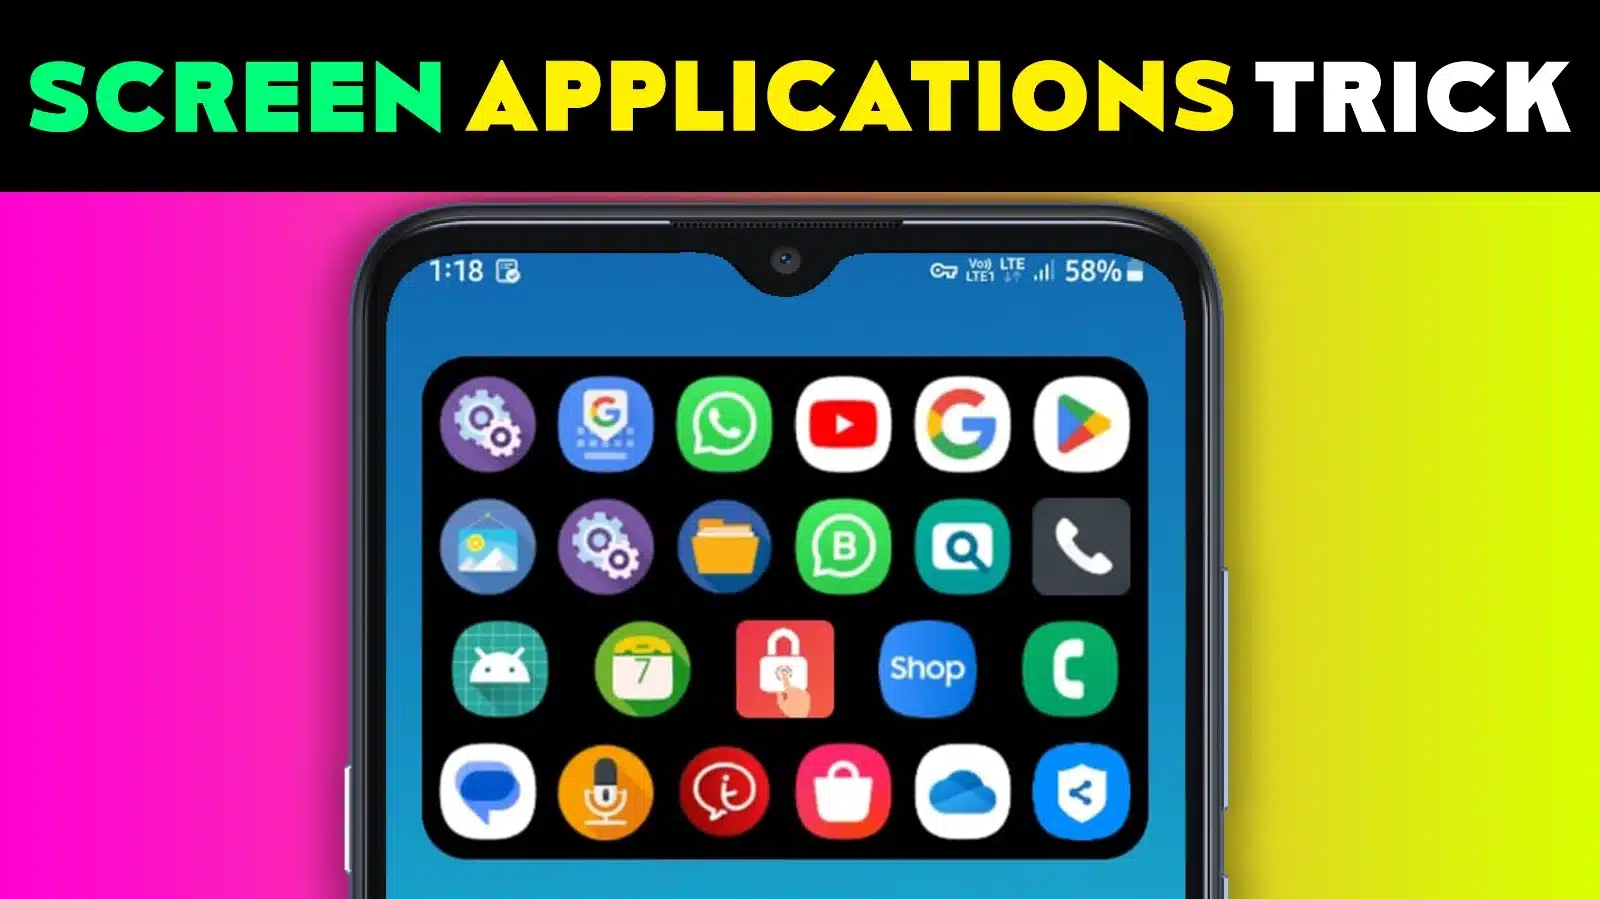 Screen Applications Frequently Used Apps Android